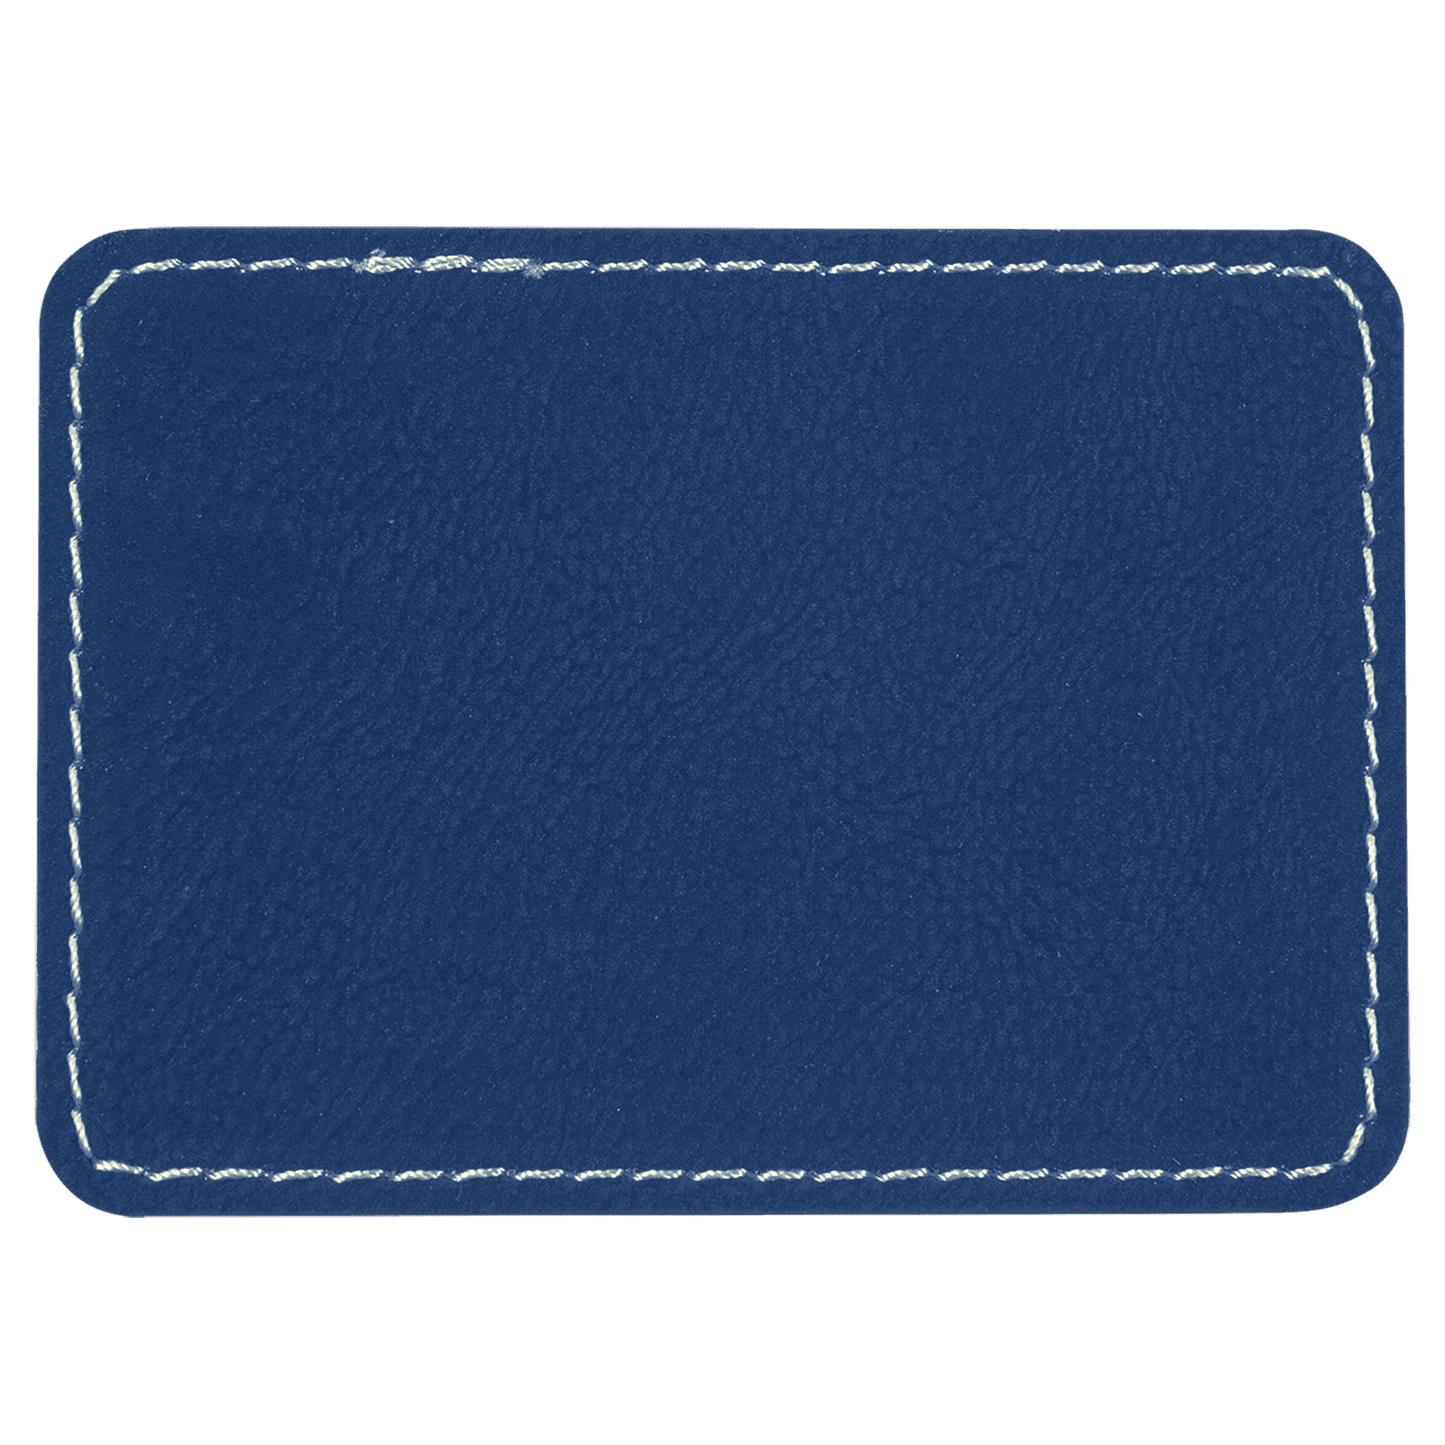 3 1/2" x 2 1/2" Rectangle Blue/Silver Laserable/DTF/UV DTF Leatherette Patch with Heat Adhesive